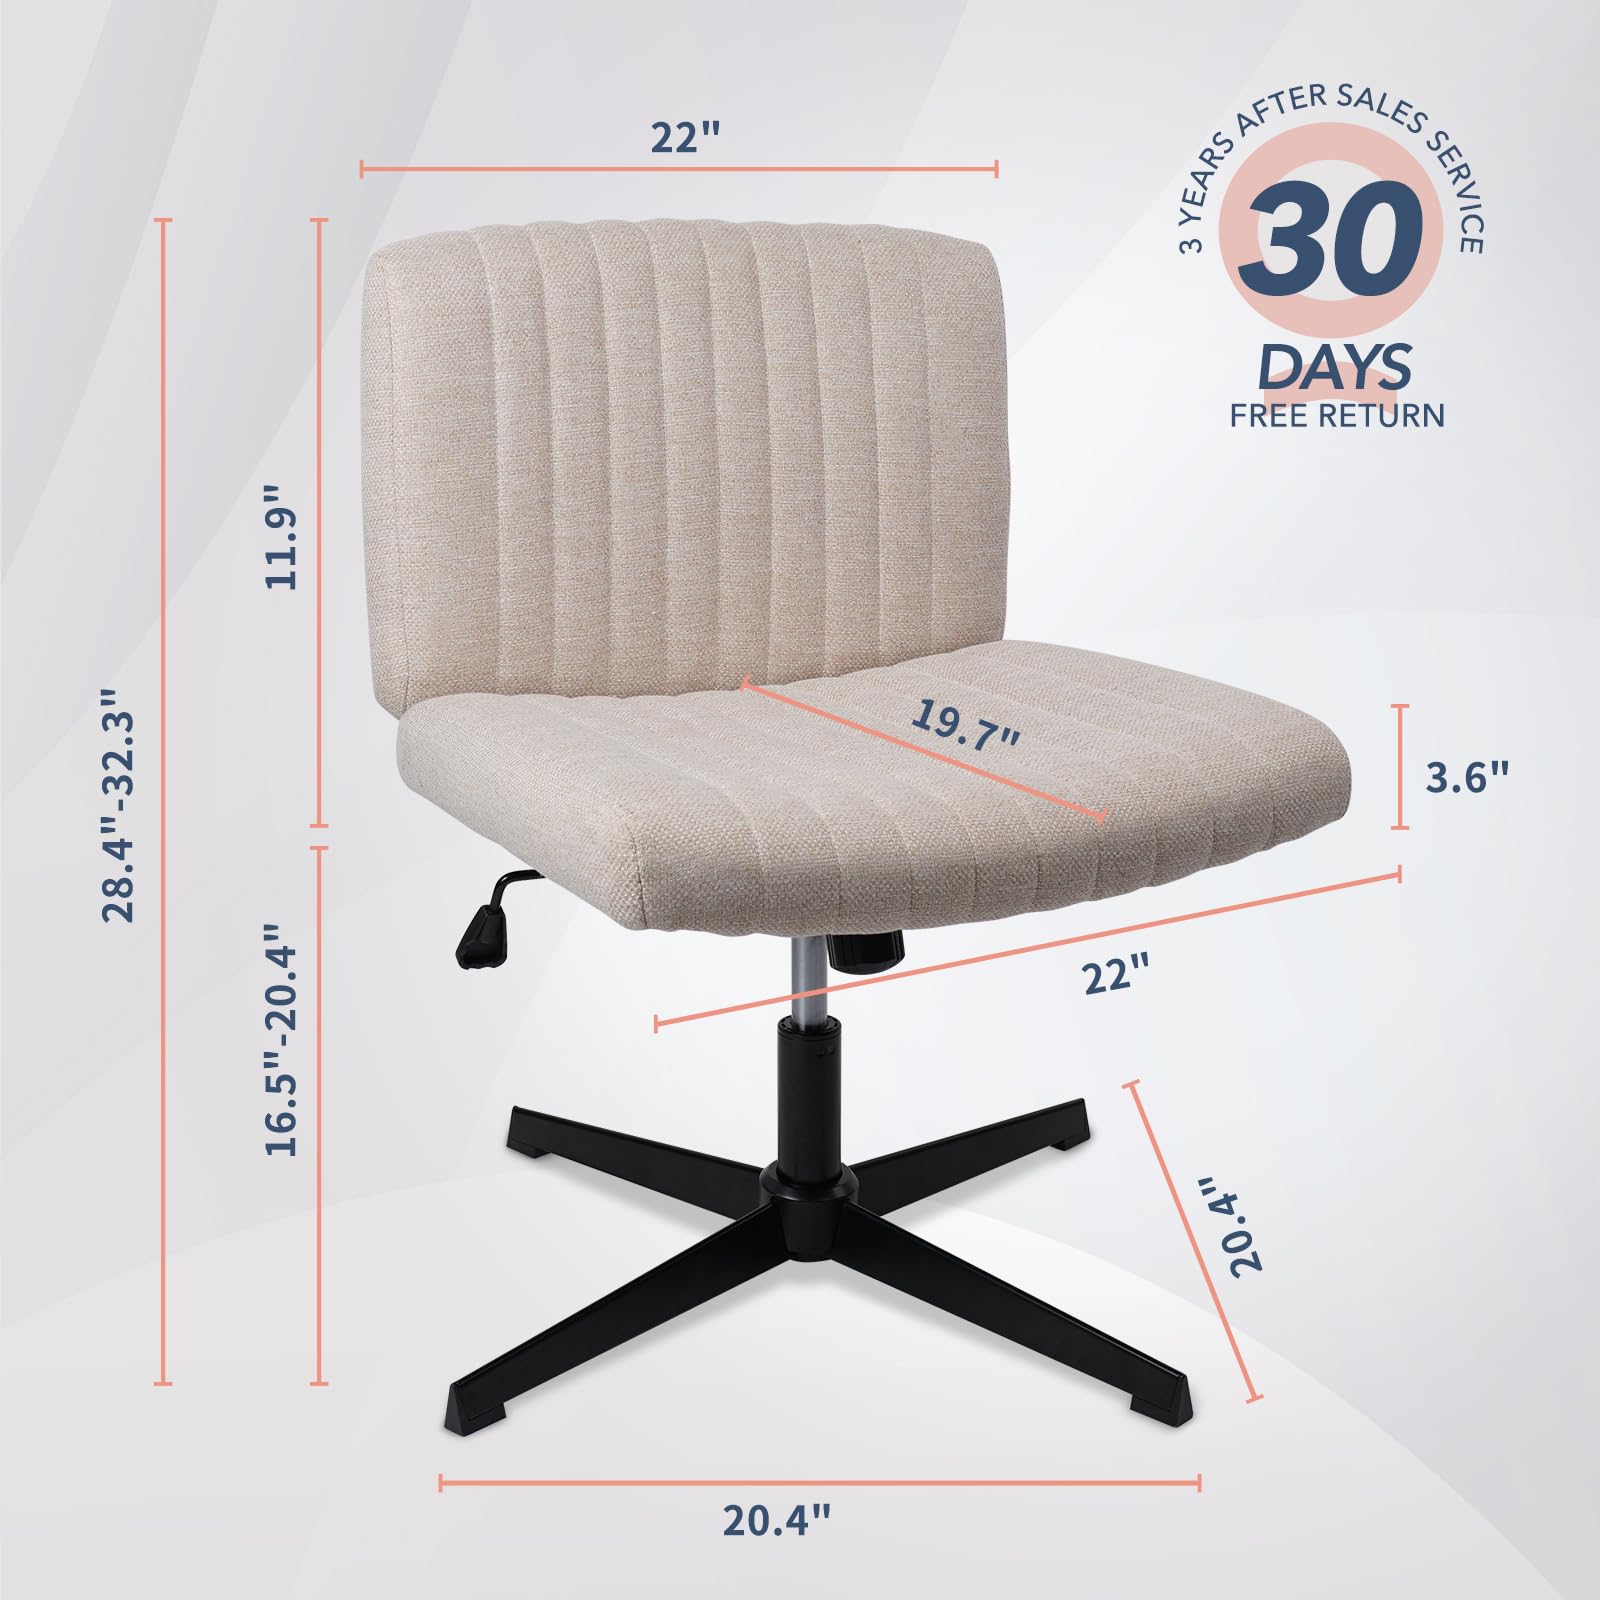 KLASIKA Ergonomic Office Chair, Armless Desk Chairs No Wheels, Adjustable Swivel Linen Fabric Computer Chair for Home Bedroom Office, Beige